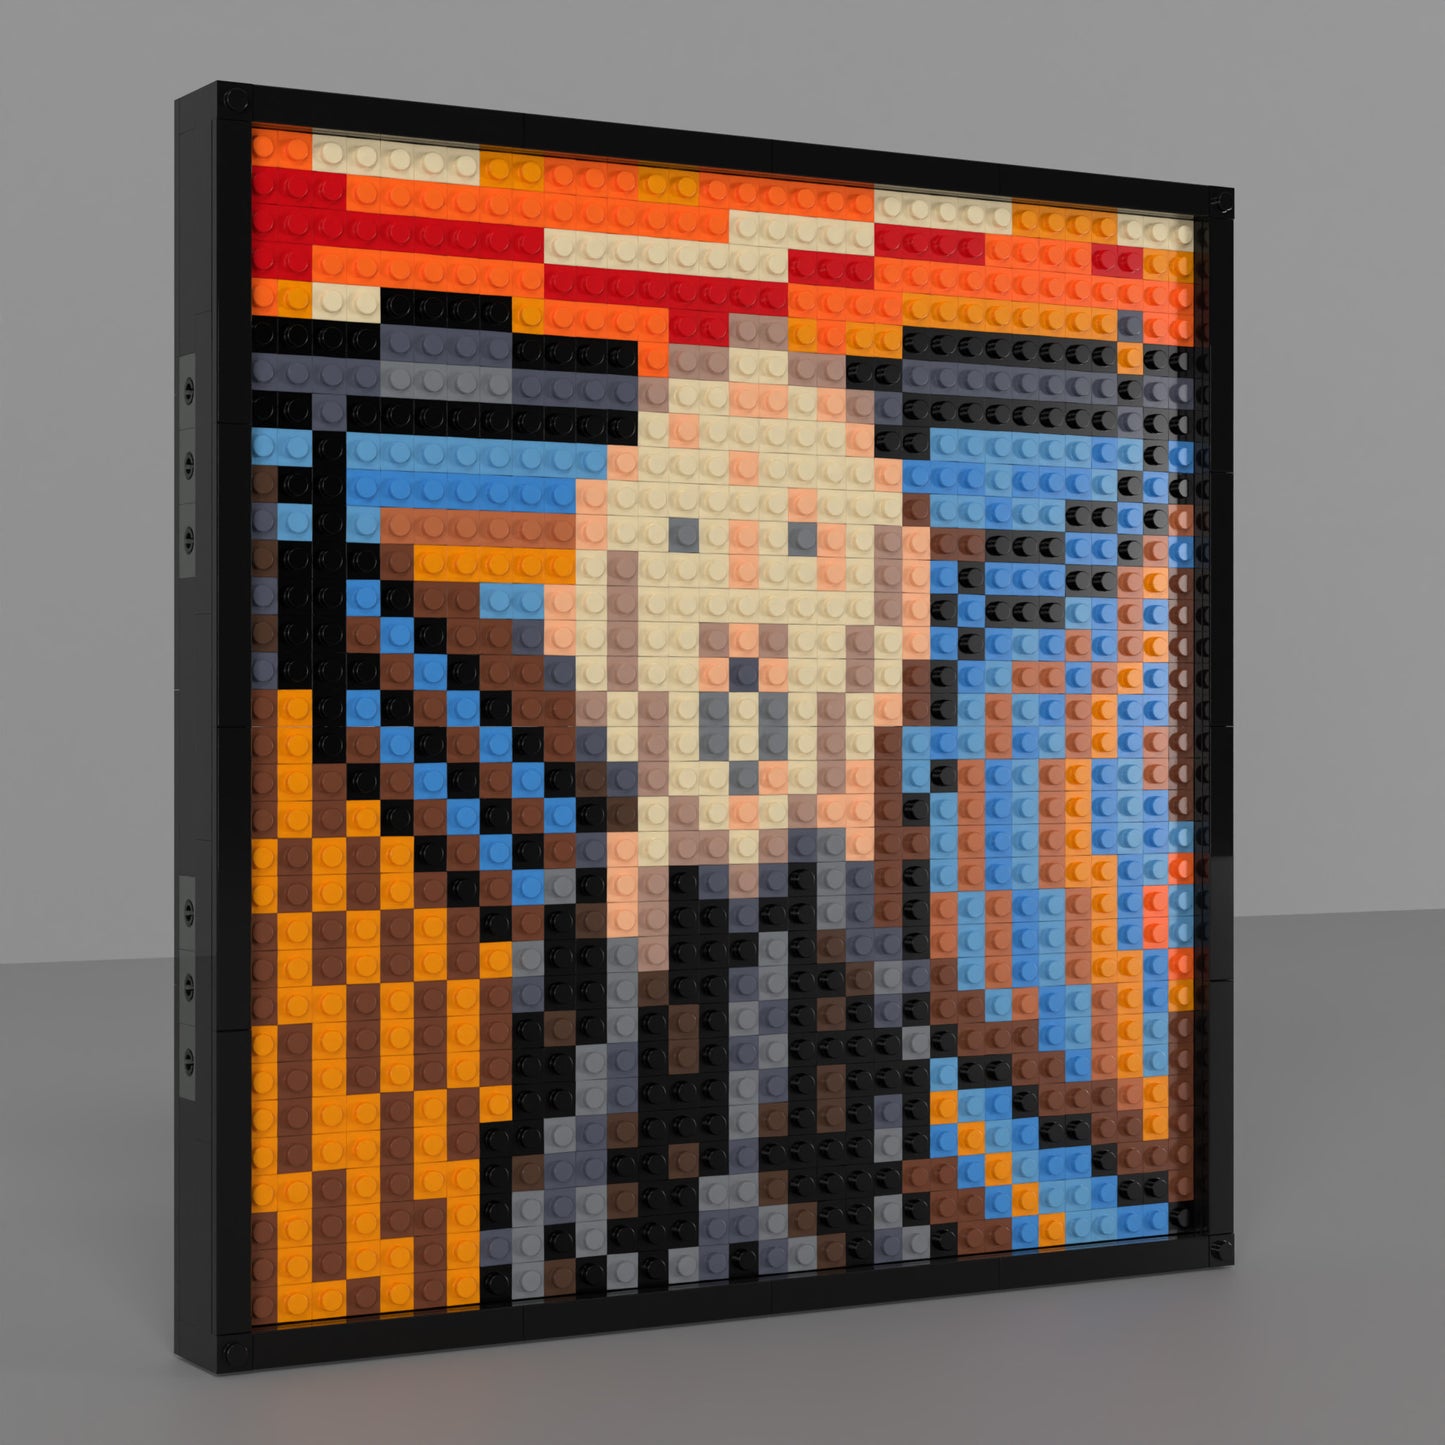 Munch's The Scream Building Brick Pixel Art - 32*32 Modular Compatible with Lego